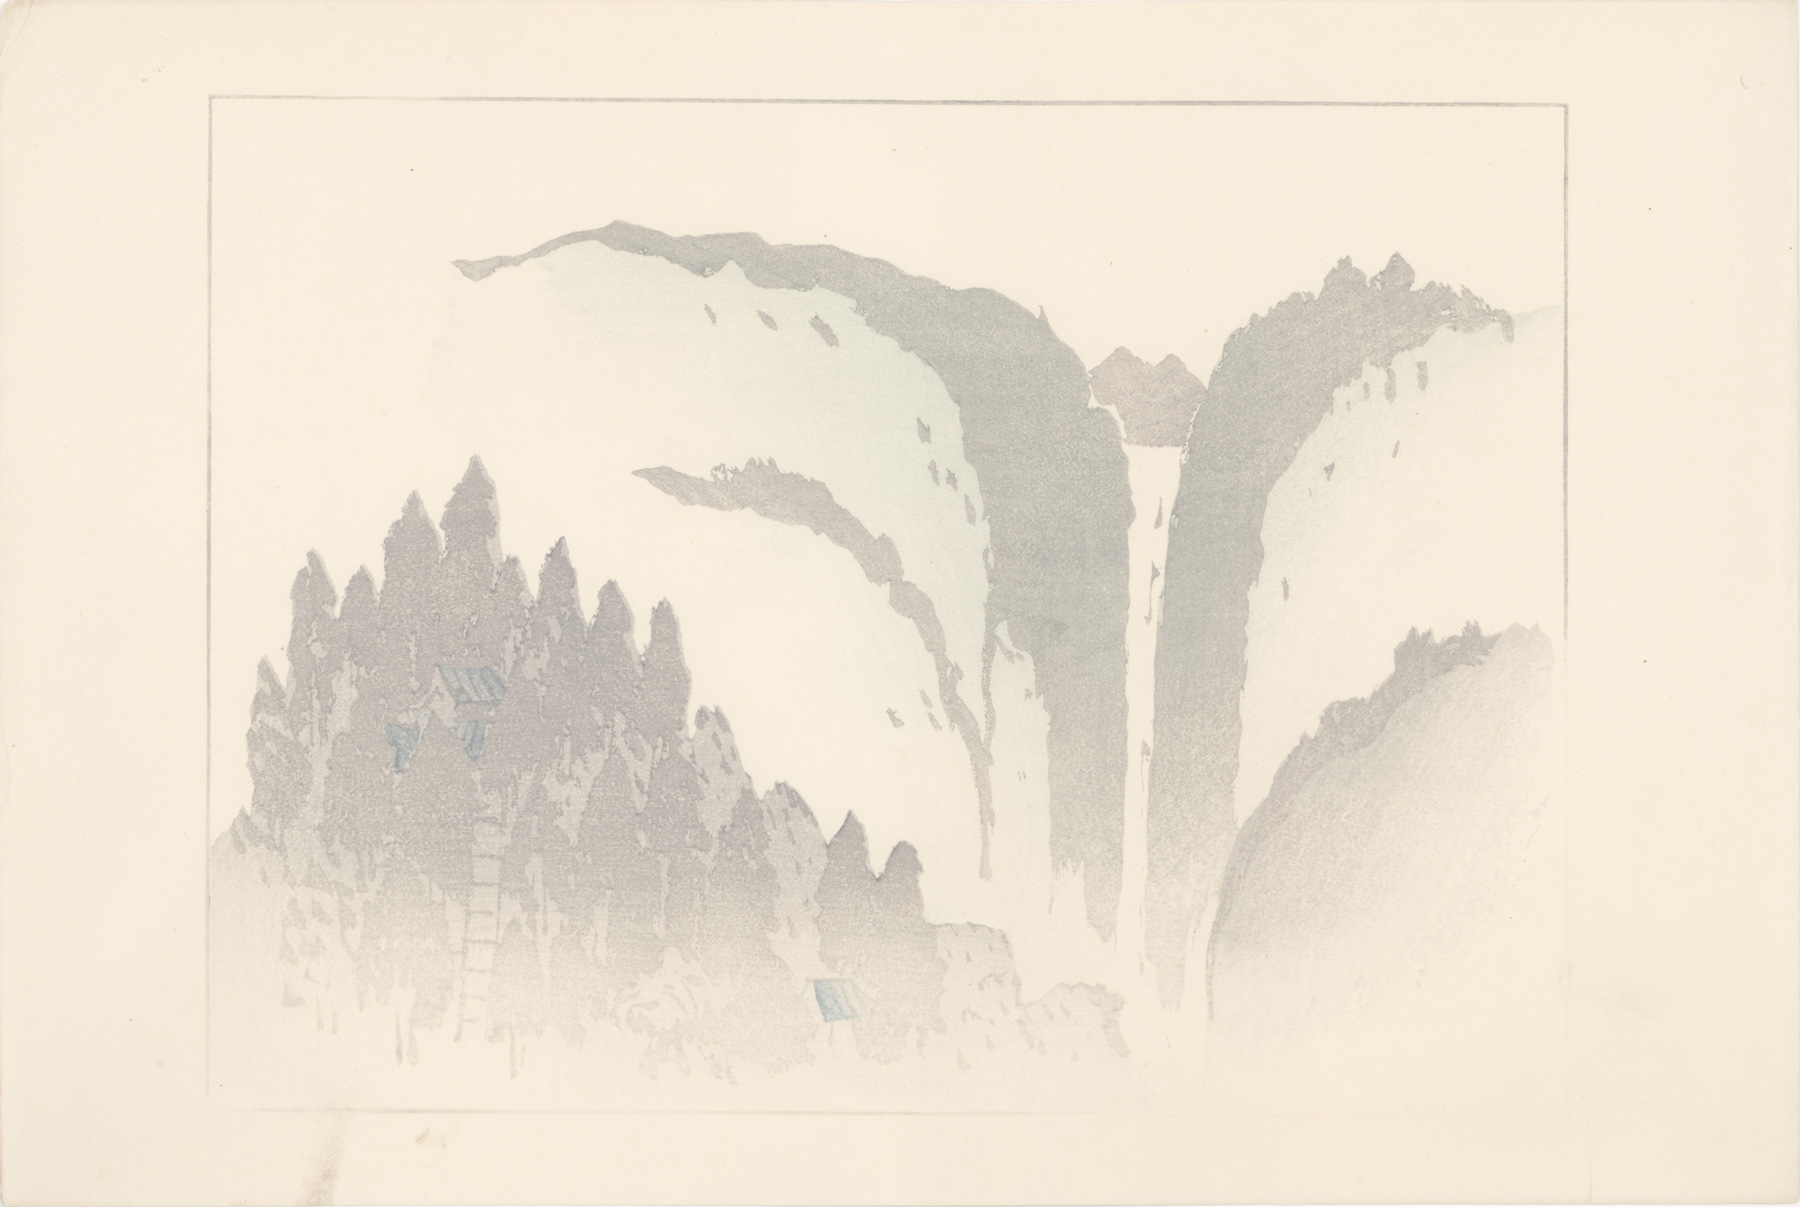 Nachi Falls from the Picture Album of the Thirty-Three Pilgrimage Places of the Western Provinces